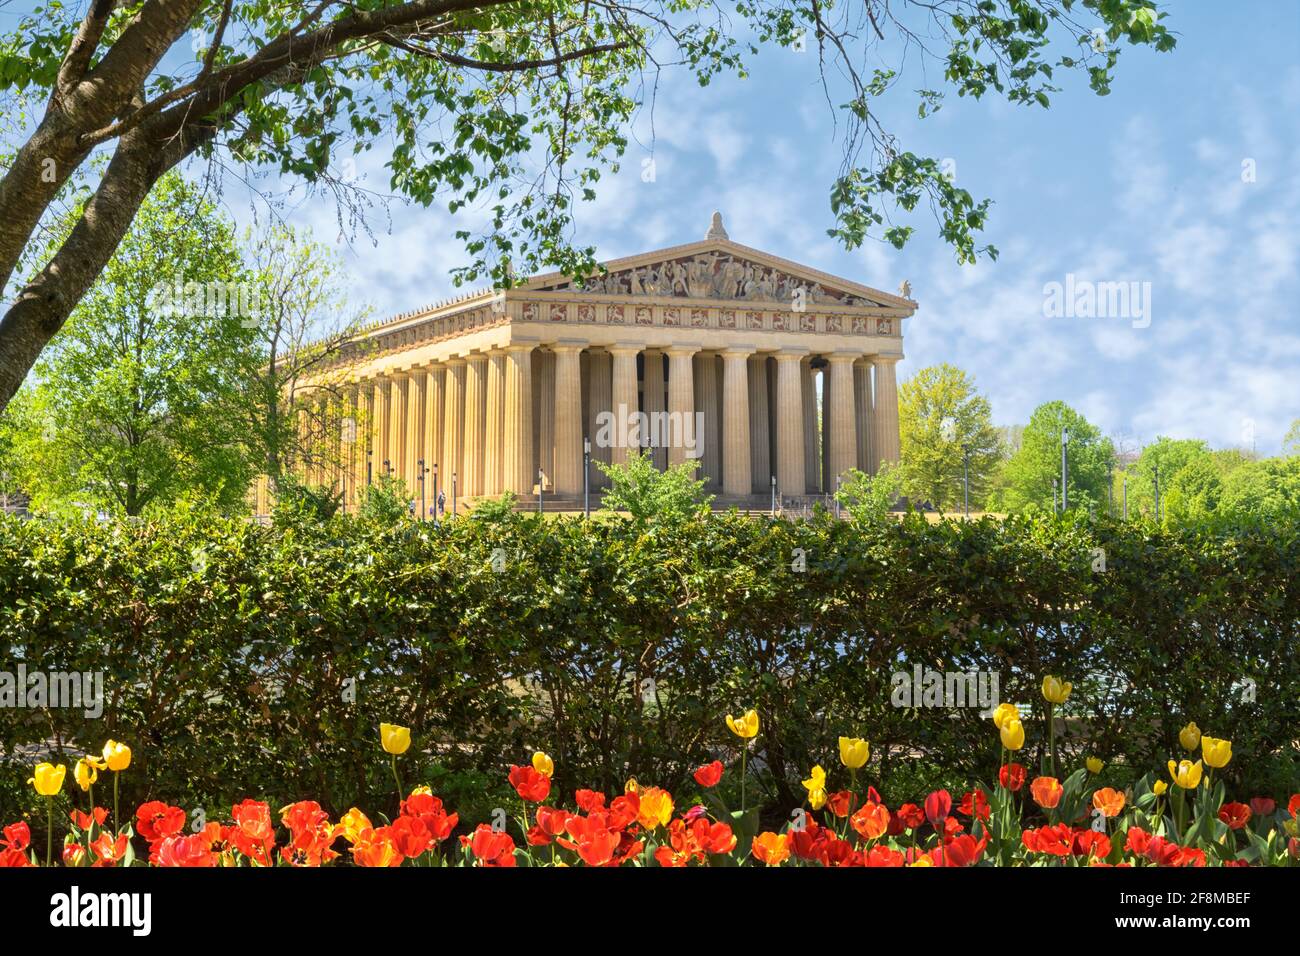 Parthenon left side with tulips in the foreground, Nashville, TN Stock Photo